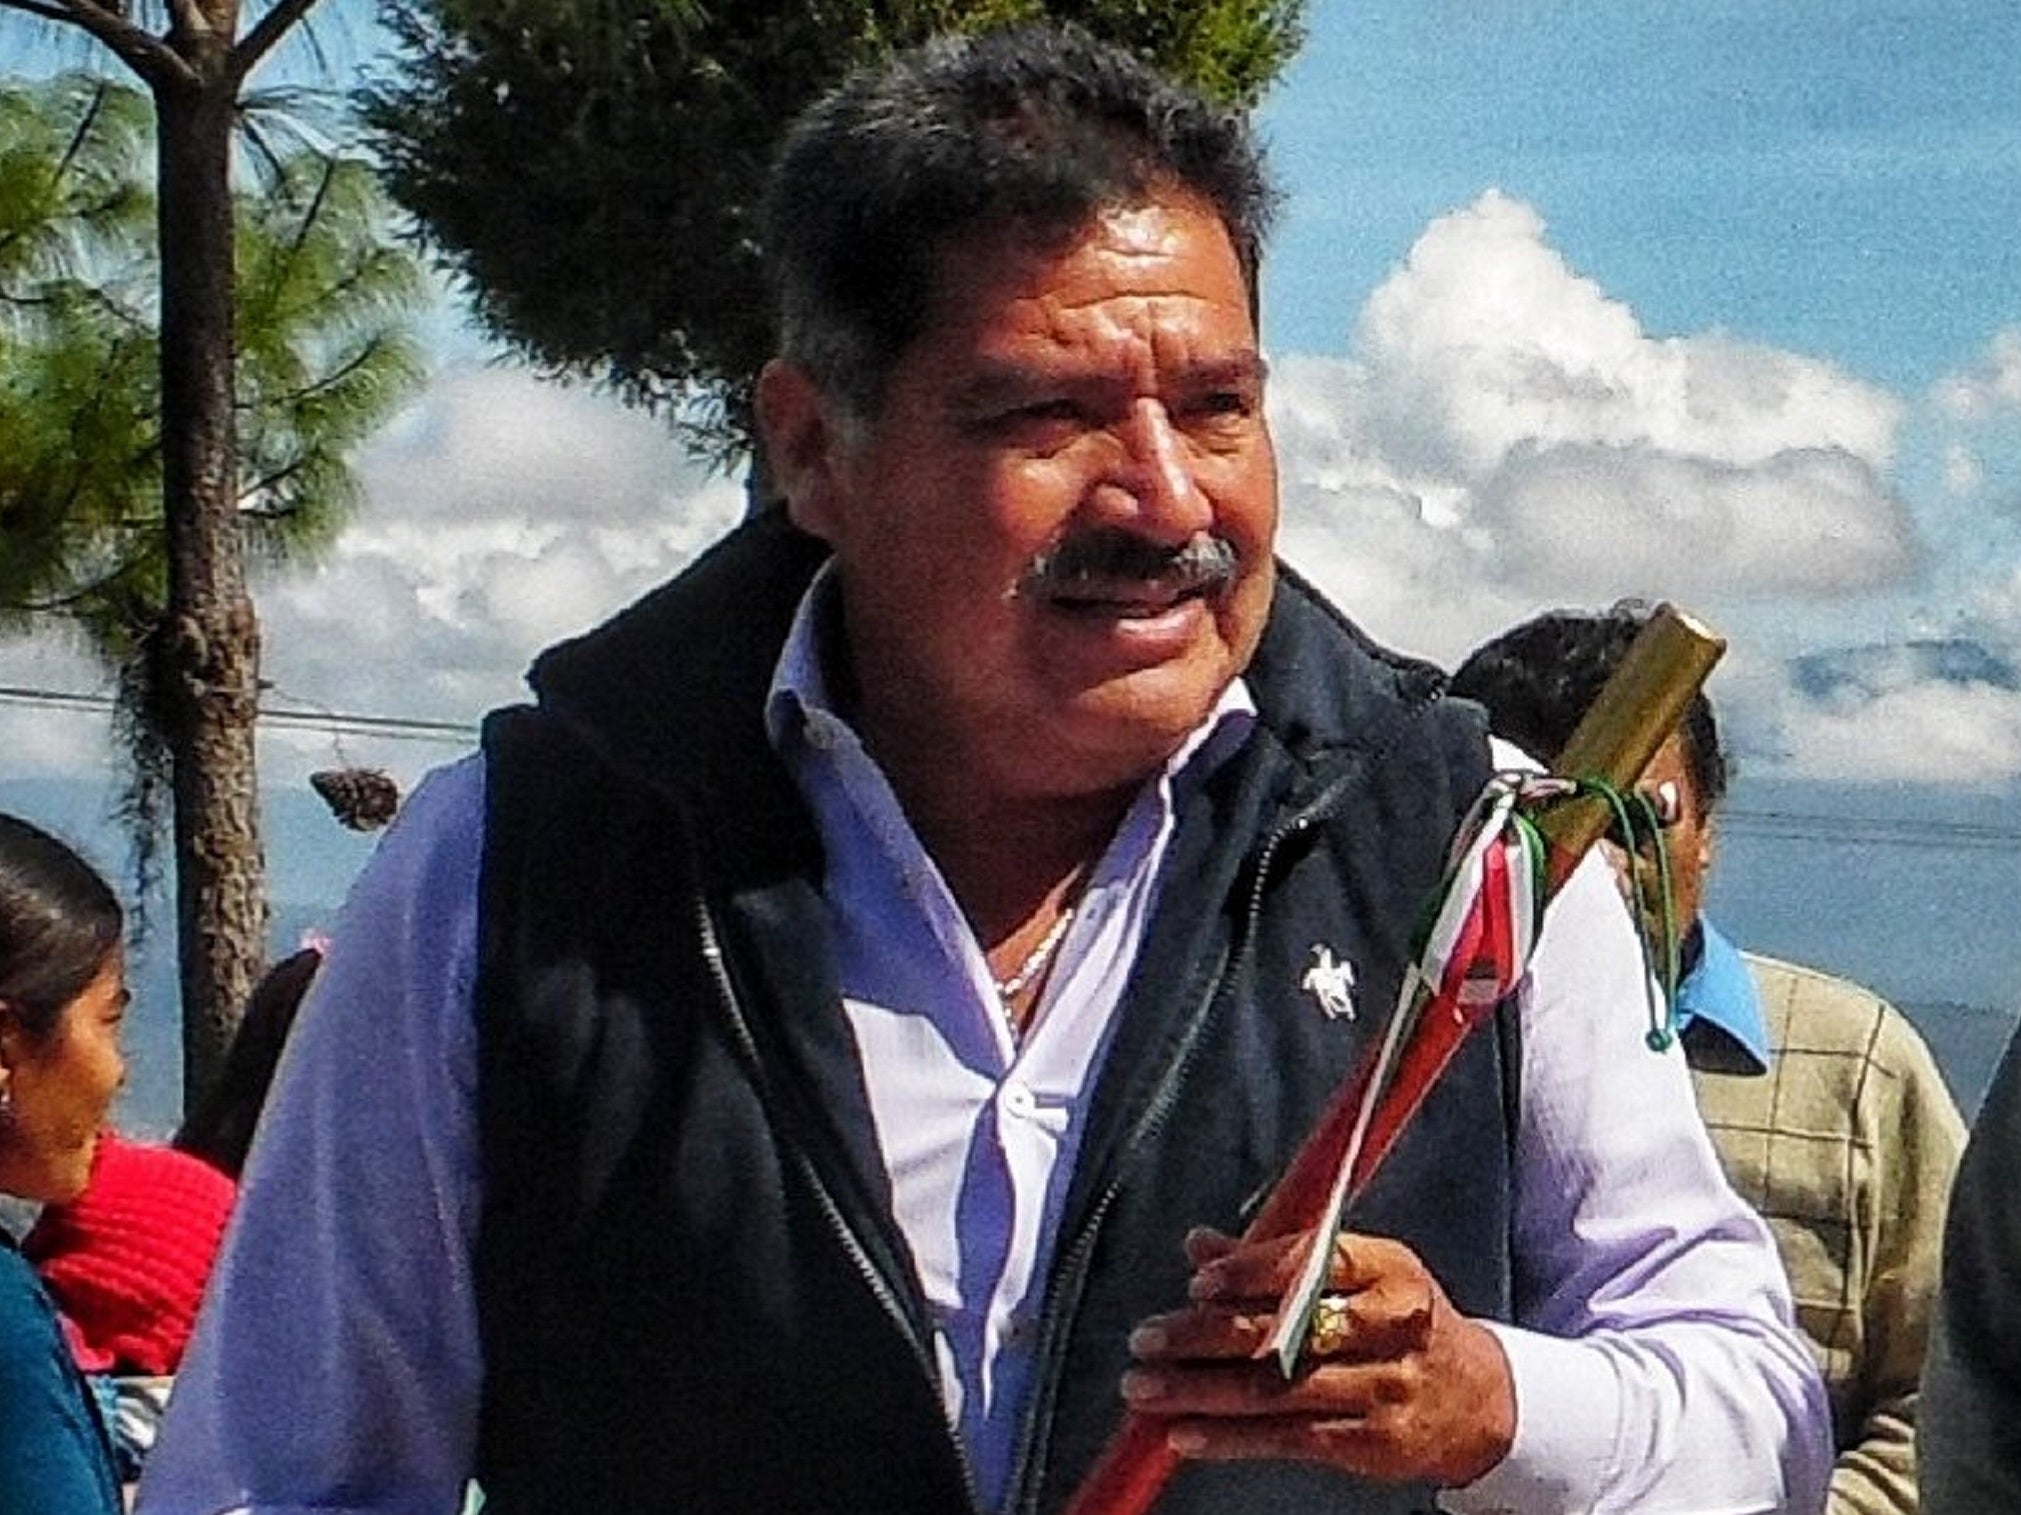 Mexican mayor Alejandro Aparicio Santiago was shot dead as he headed to the city hall in Tlaxiaco, Oaxaca, for his first meeting just hours after being sworn in.